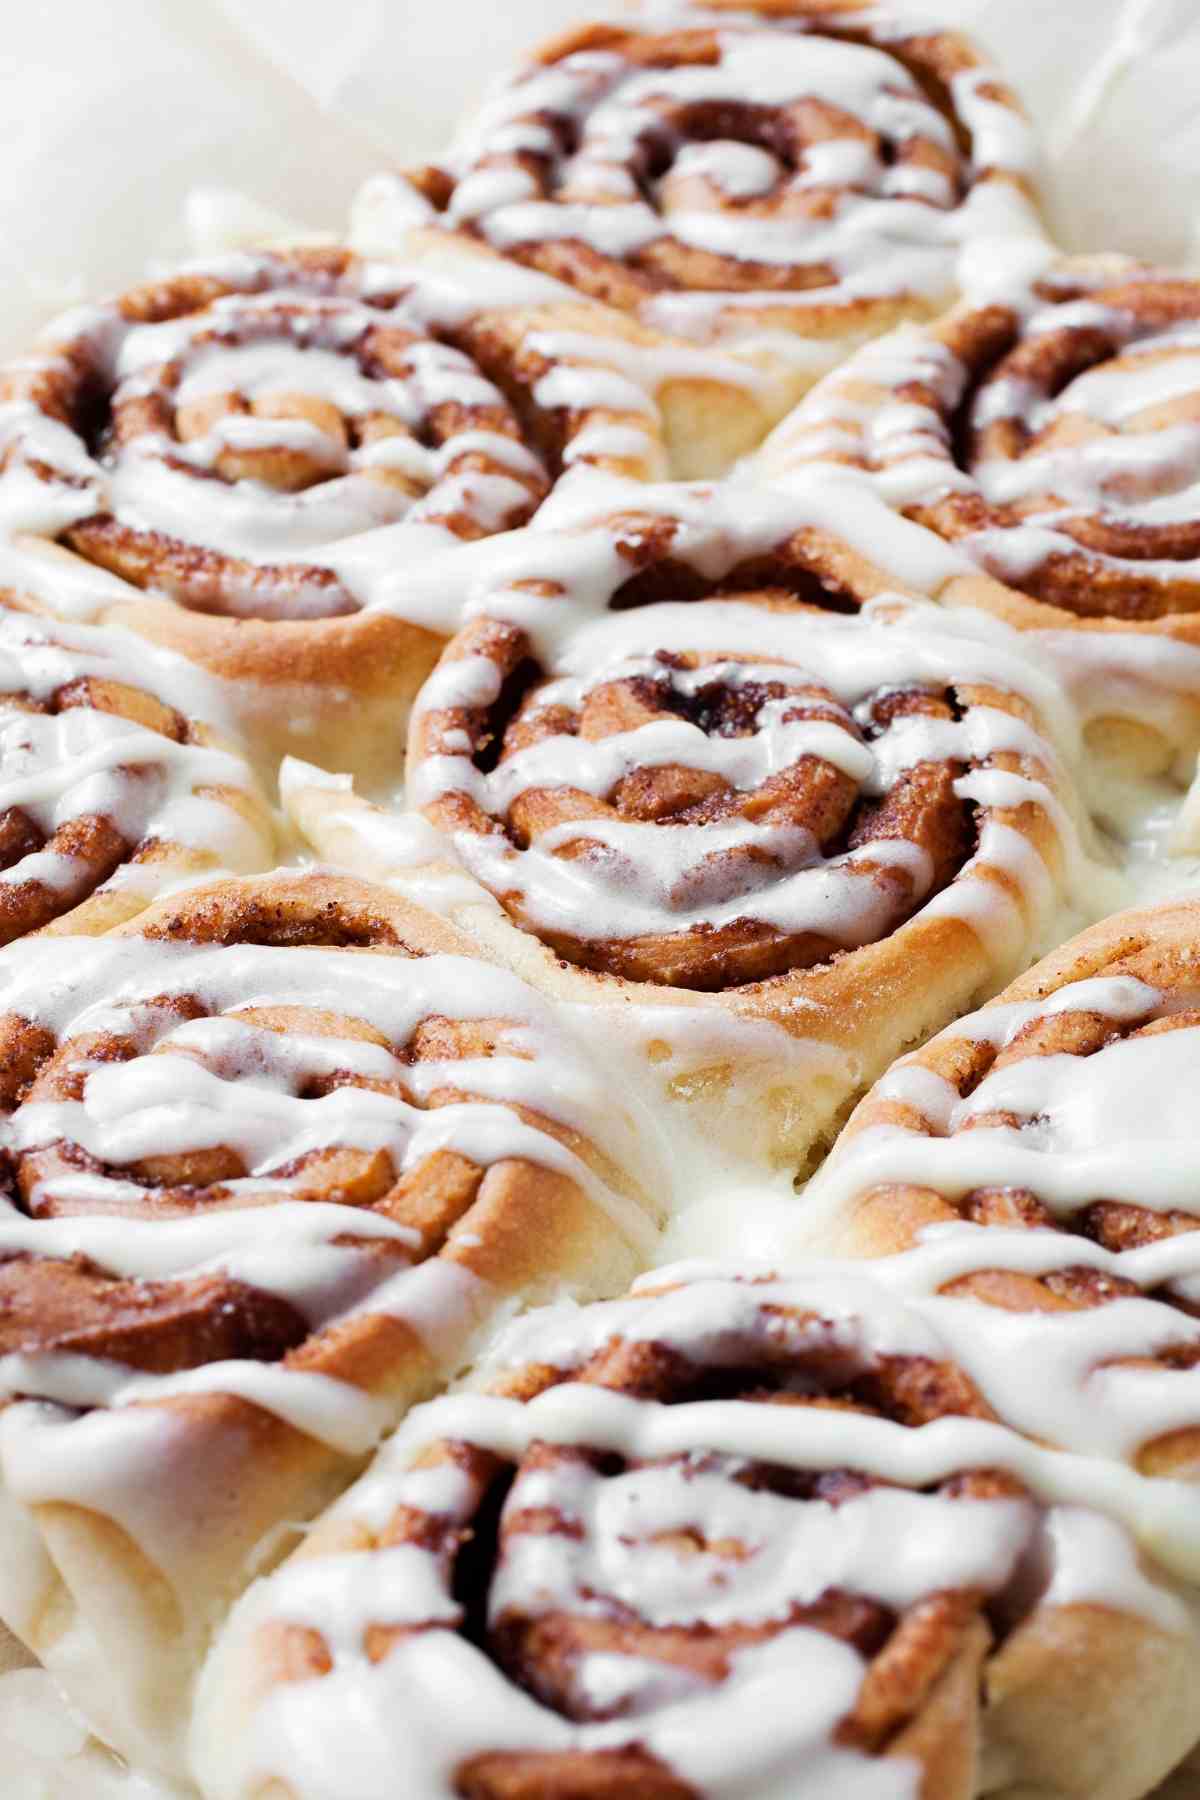 These Orange Cinnamon Rolls combine the delicious flavors of tangy citrus and sweet cinnamon for the perfect breakfast, snack, or anytime treat!